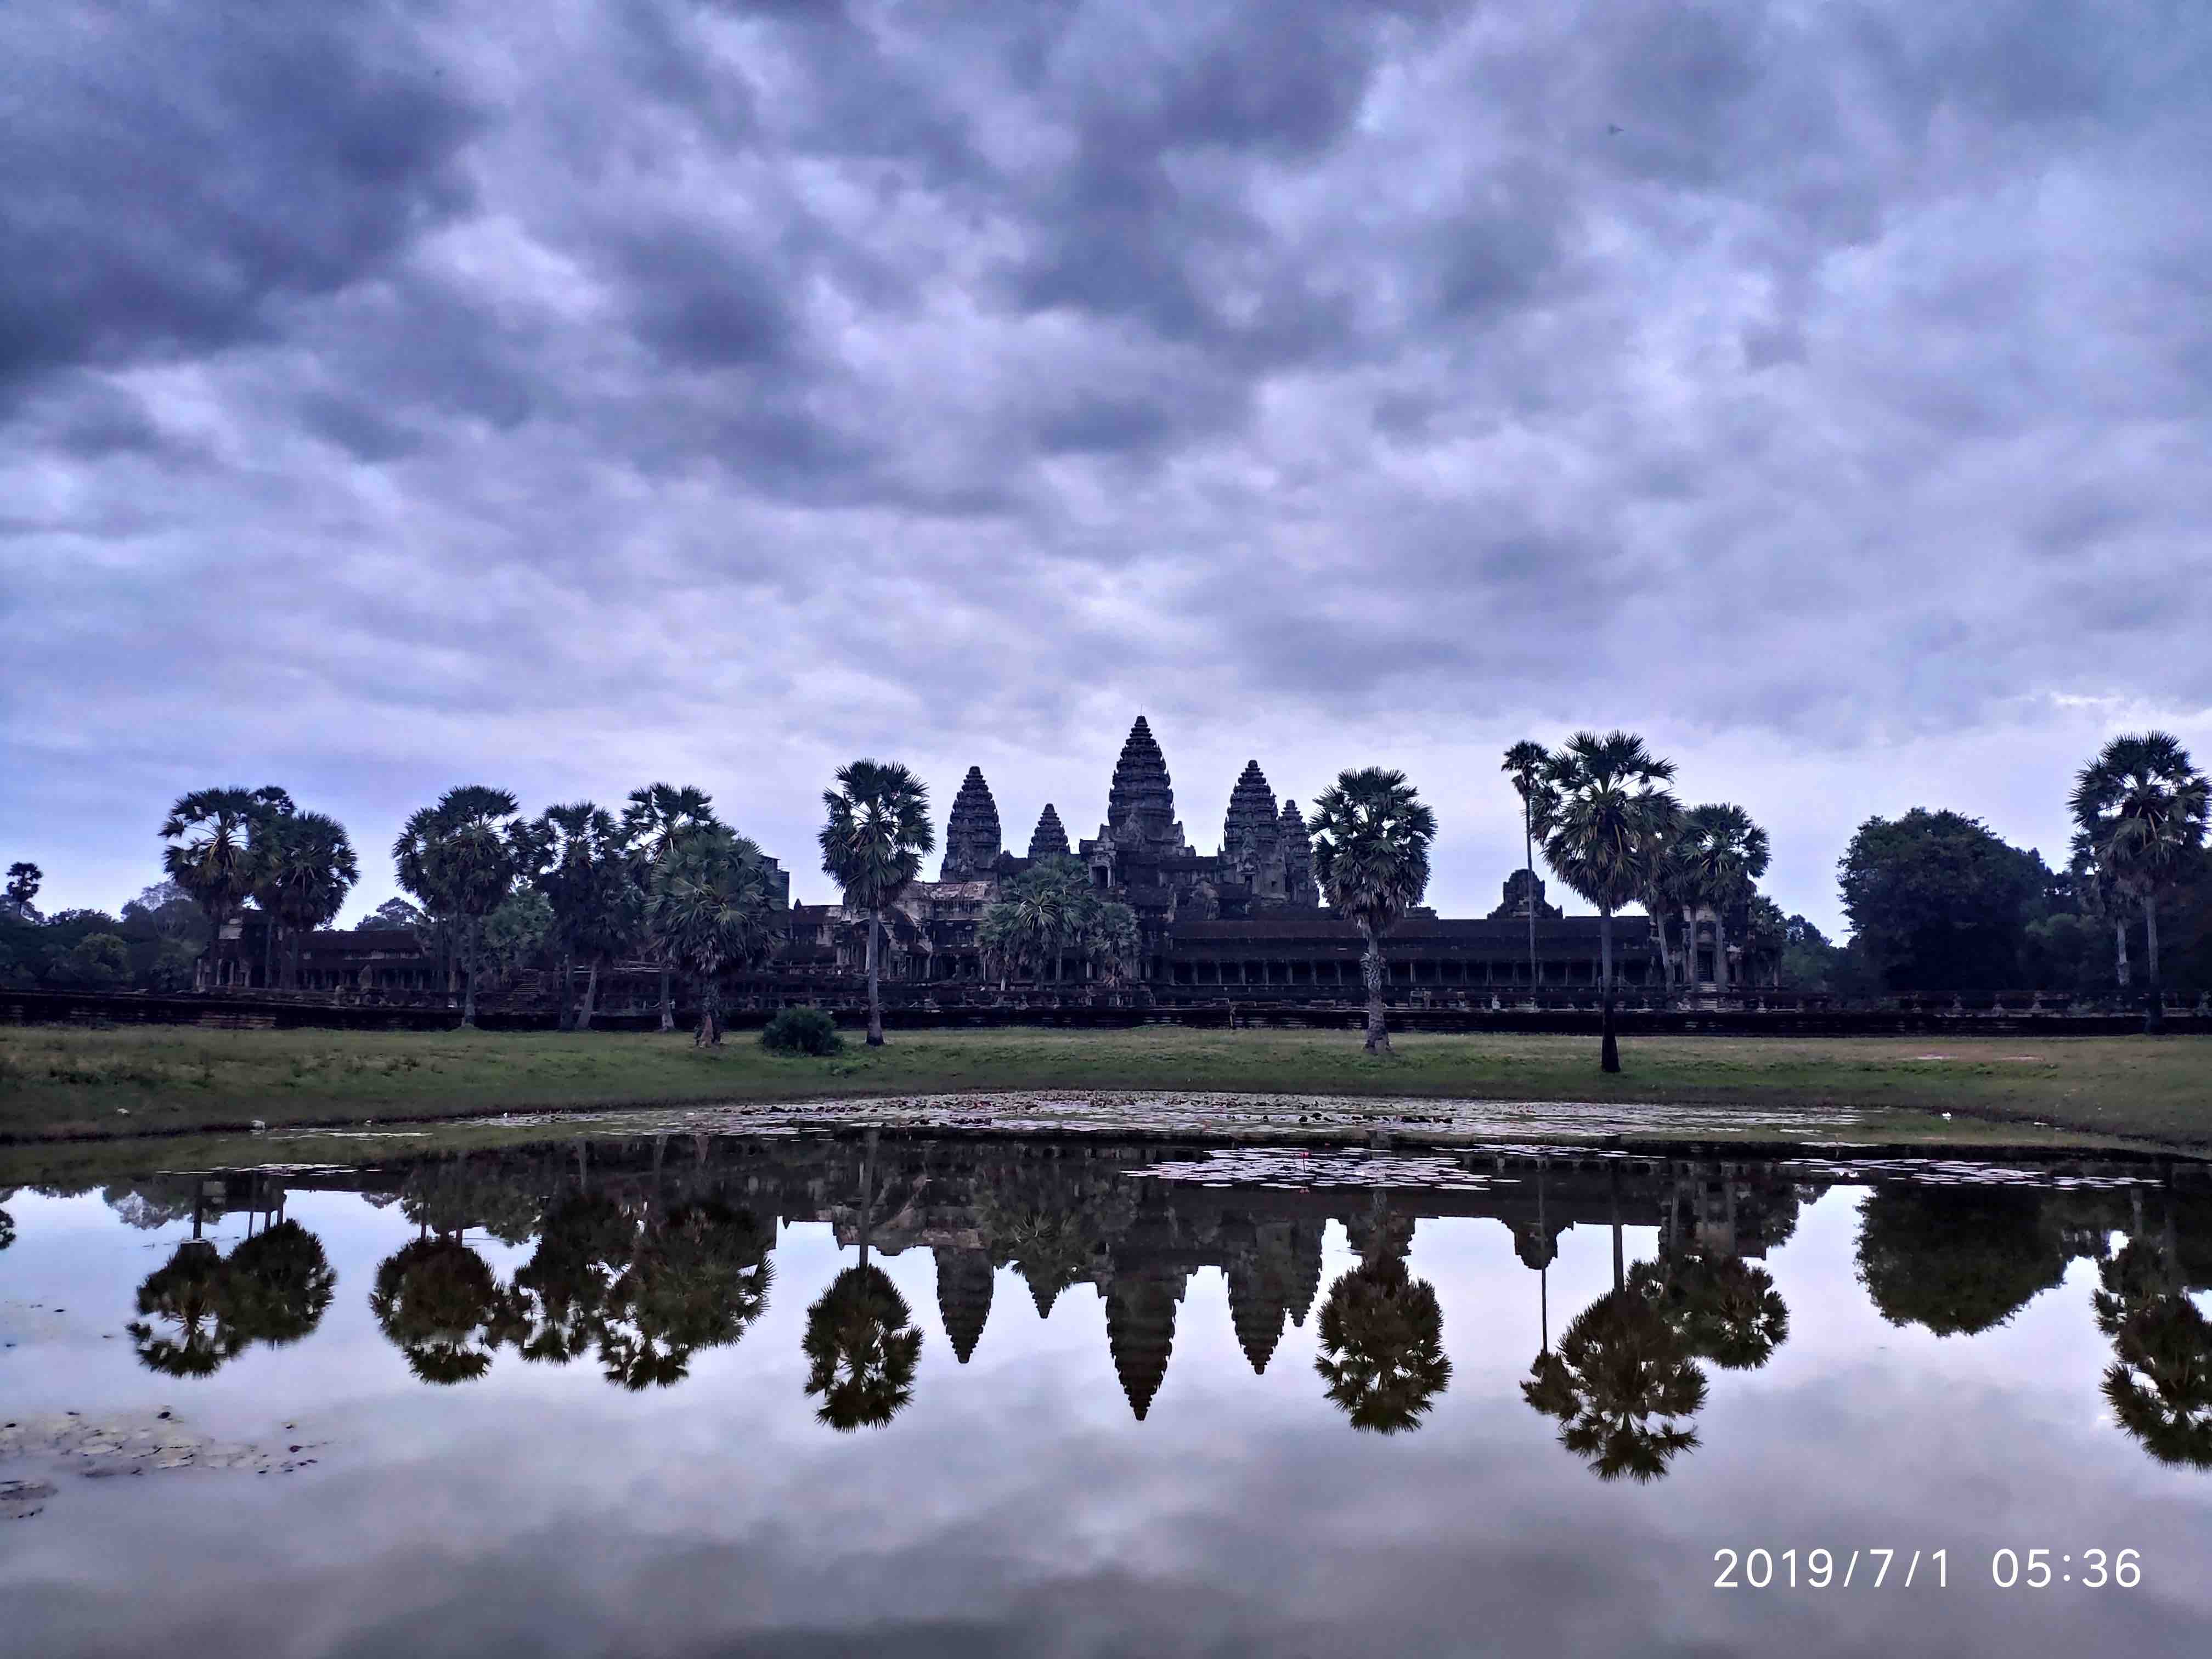 Figure 1 | Angkor Wat: a temple complex in Cambodia and one of the largest religious monuments in the world